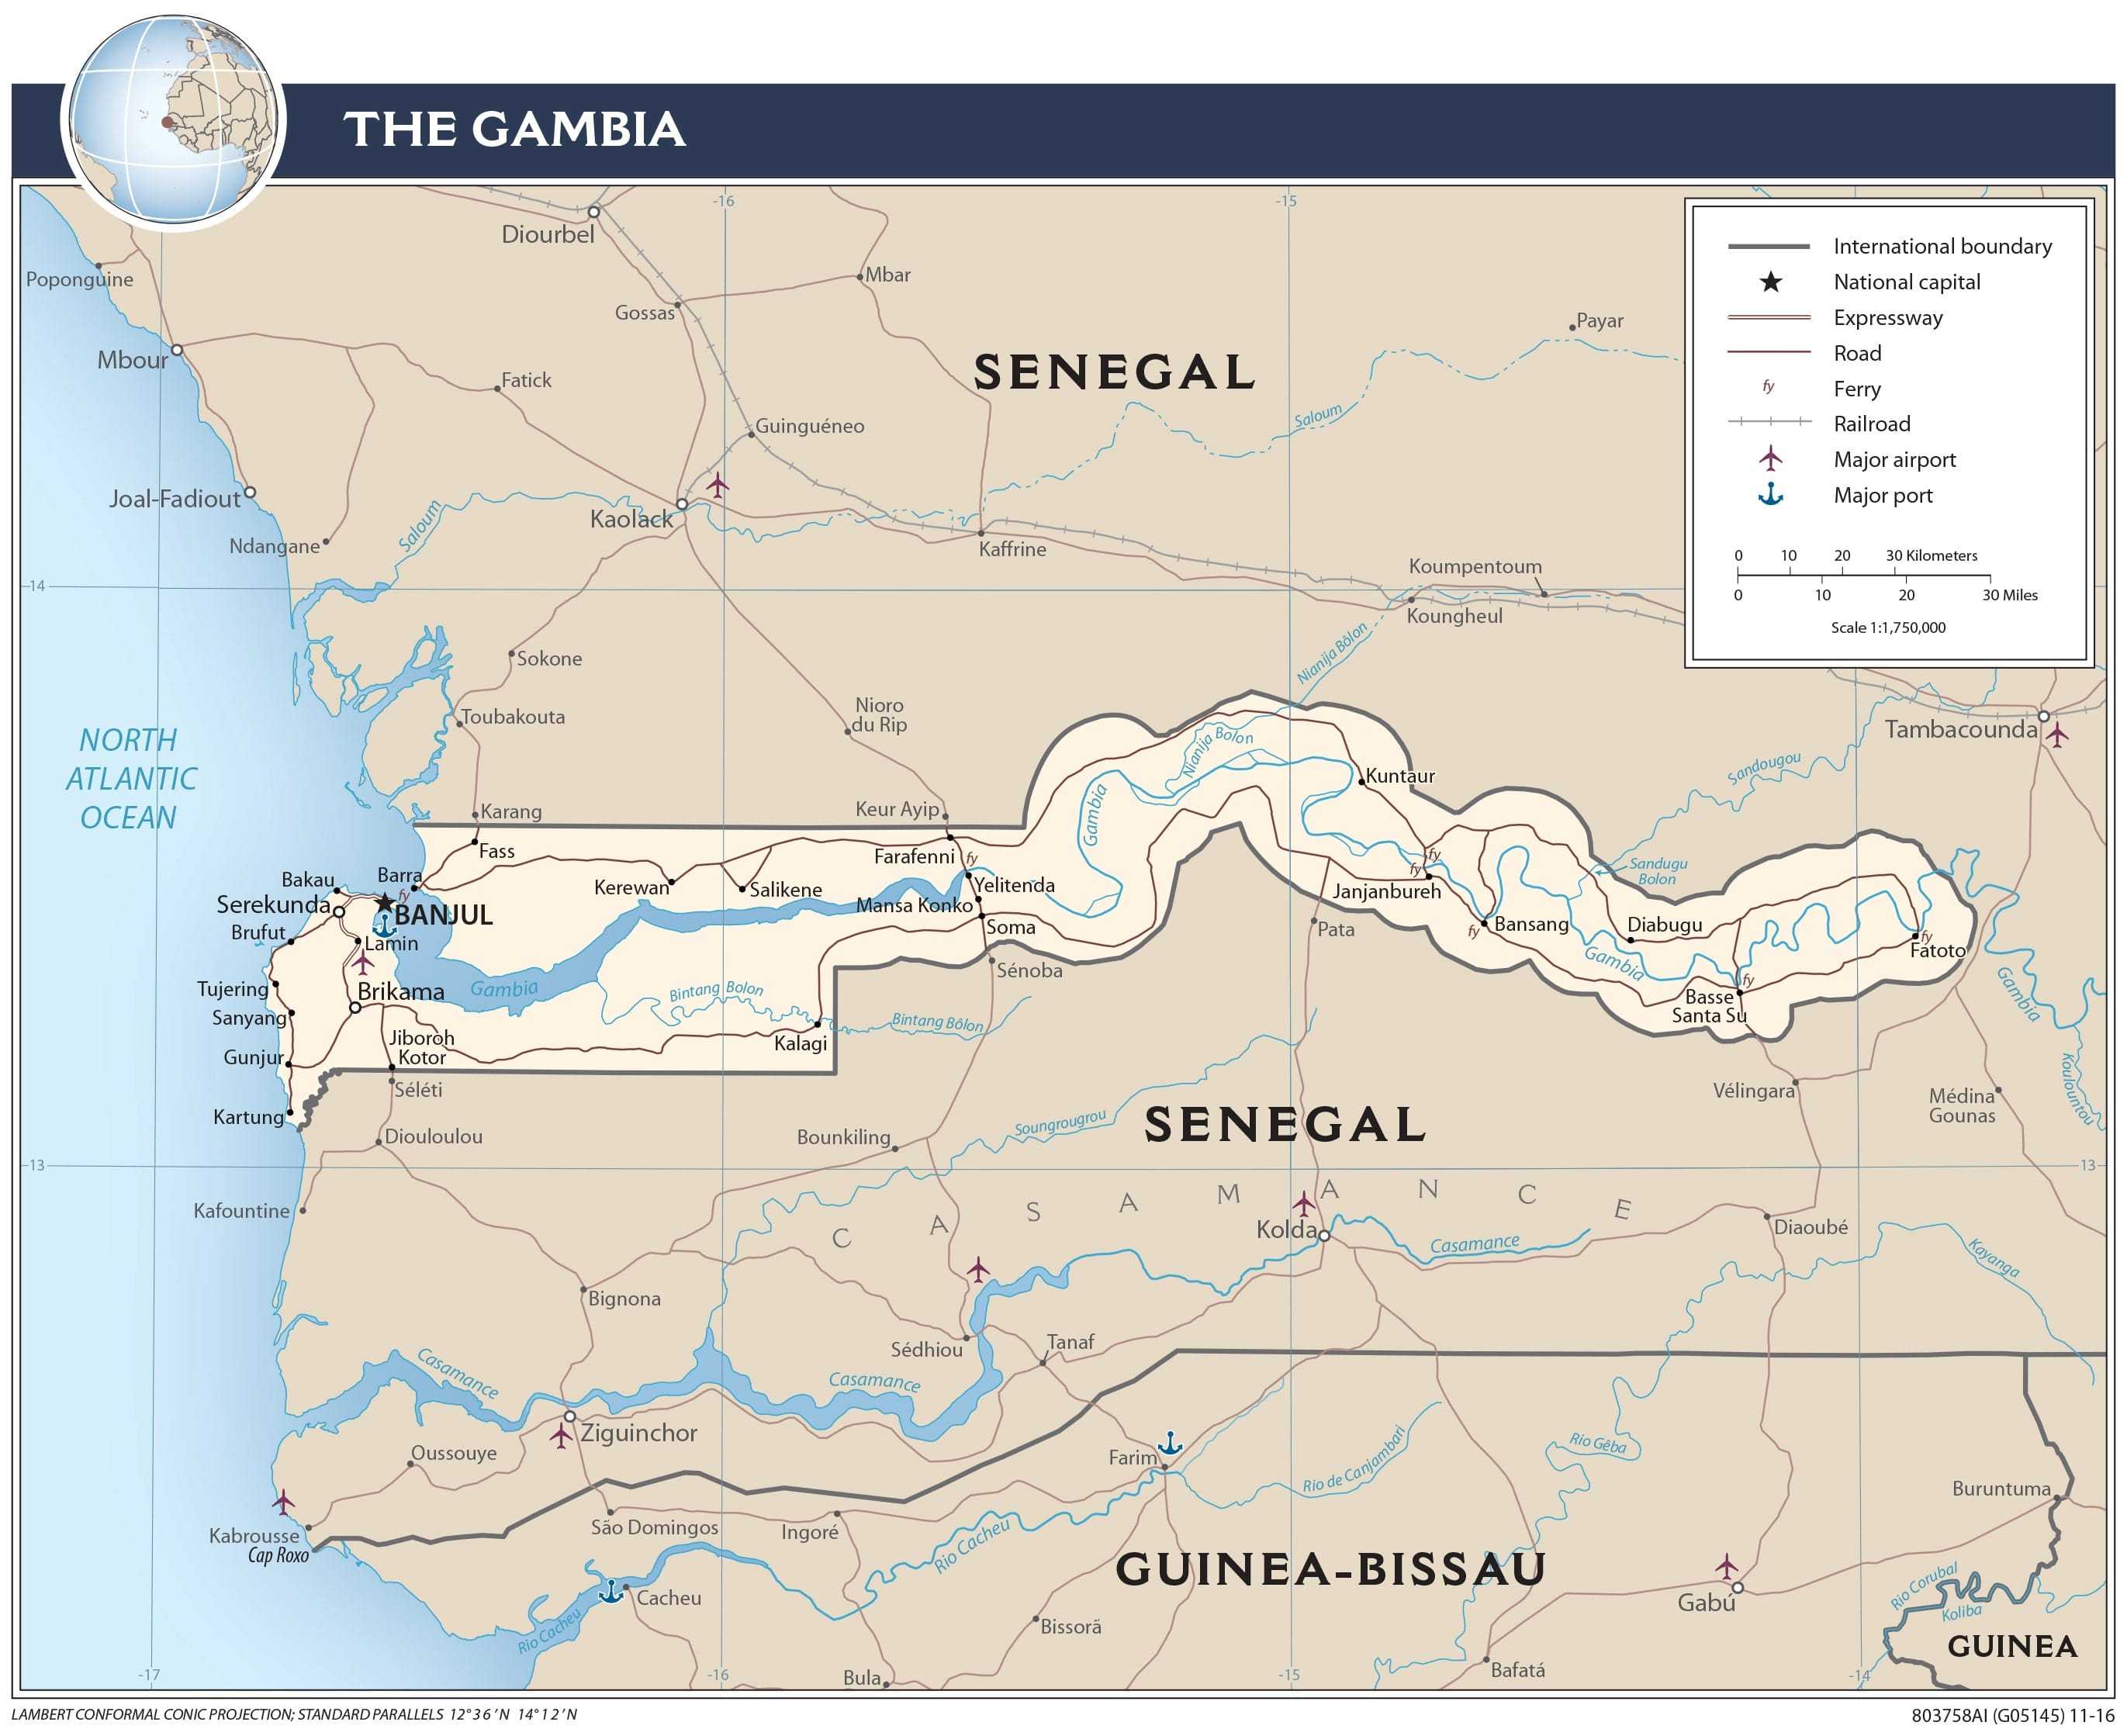 Transportation map of Gambia.